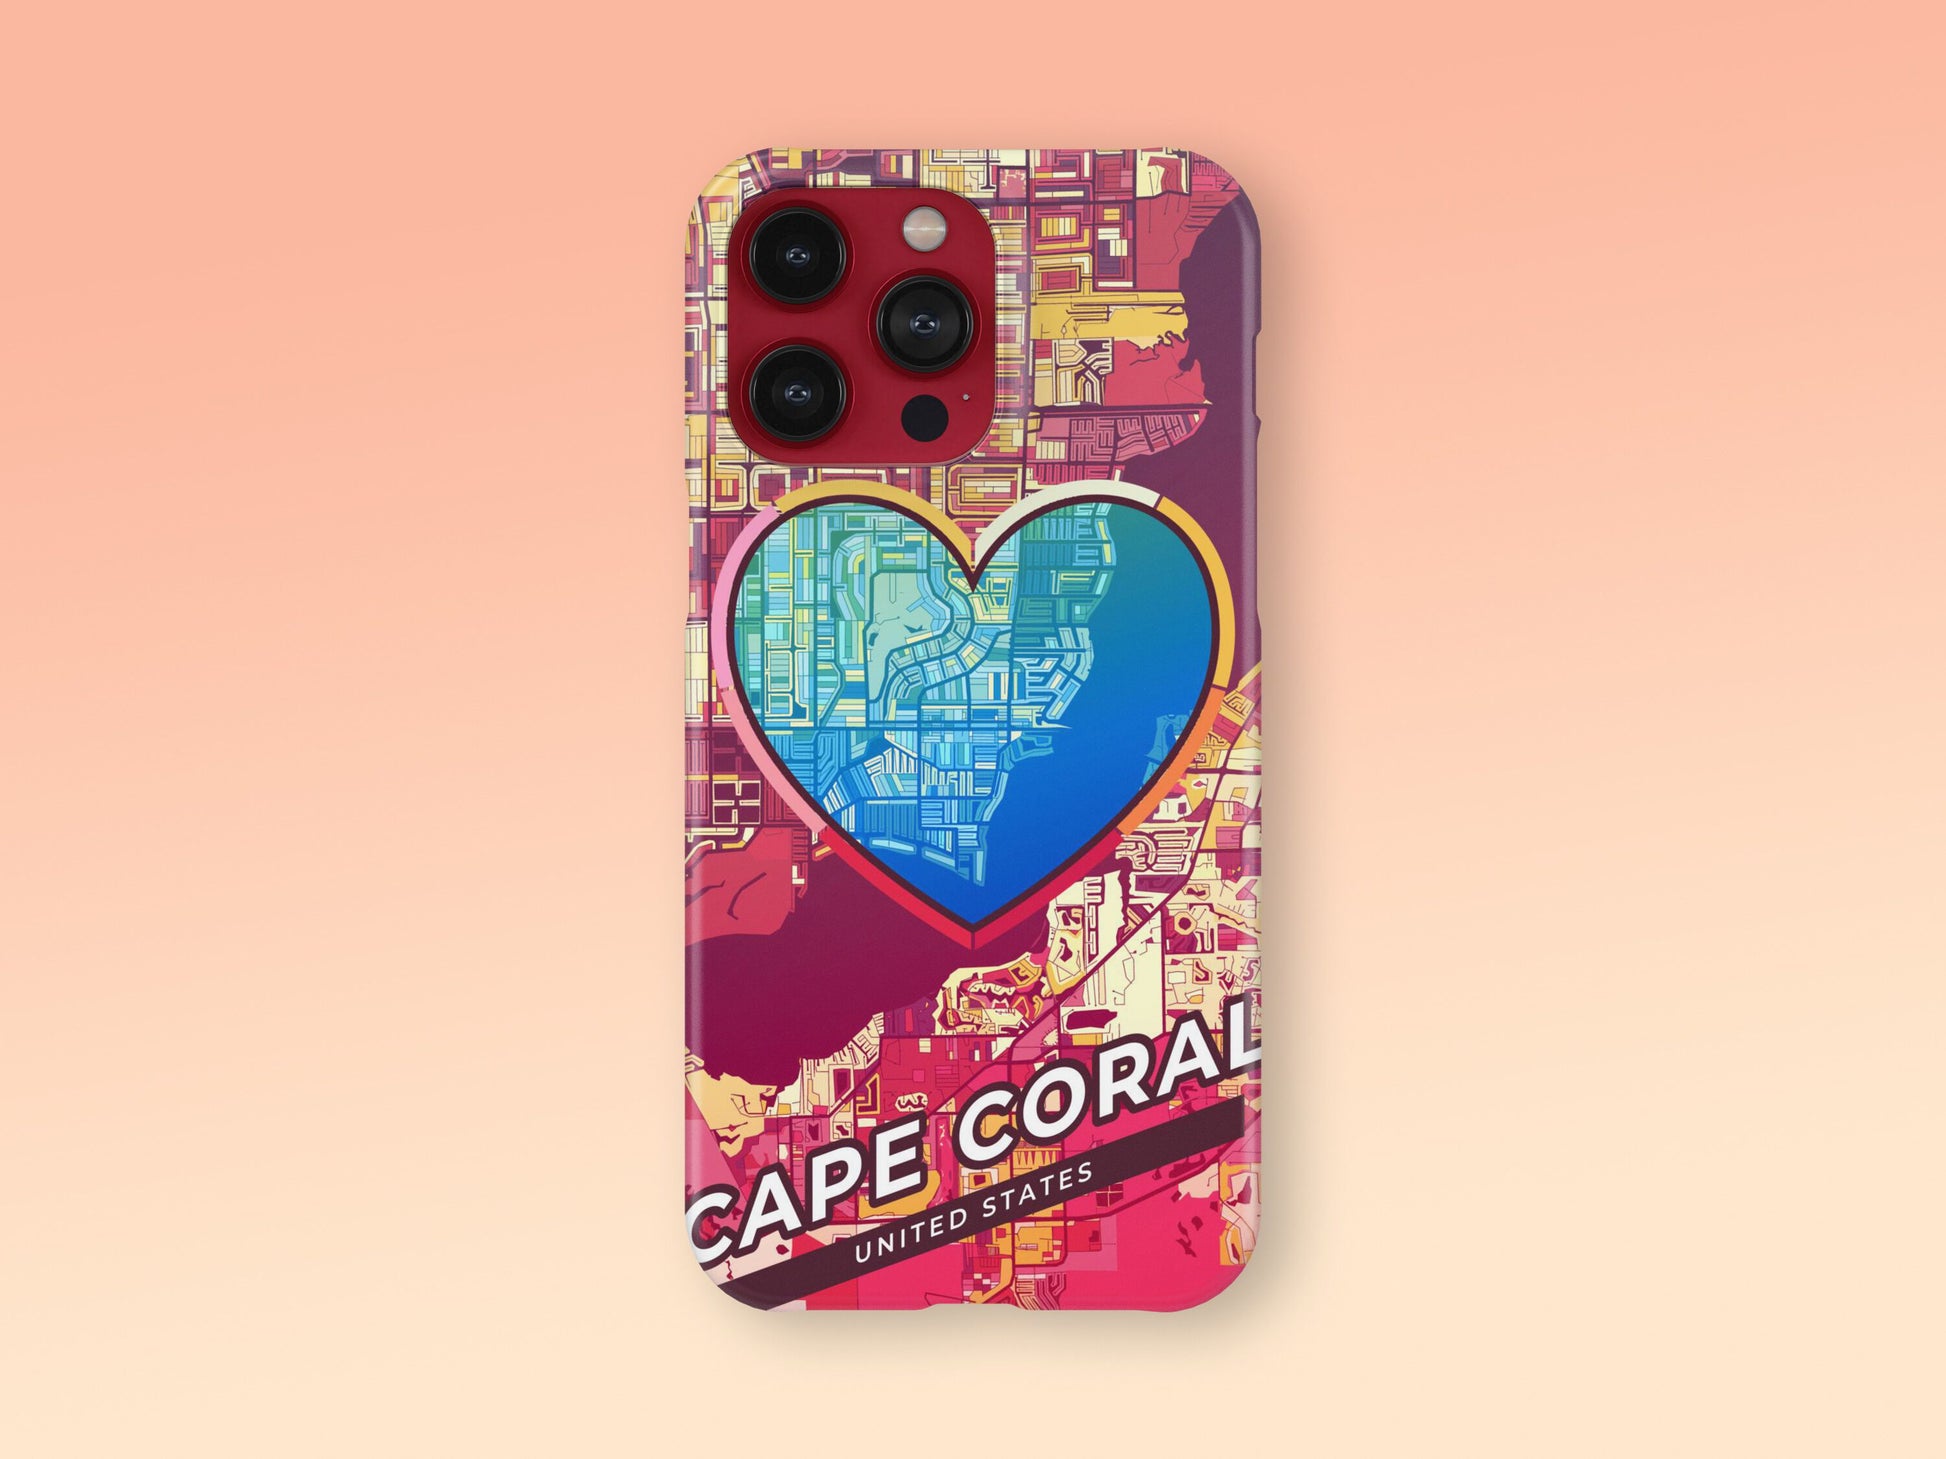 Cape Coral Florida slim phone case with colorful icon. Birthday, wedding or housewarming gift. Couple match cases. 2